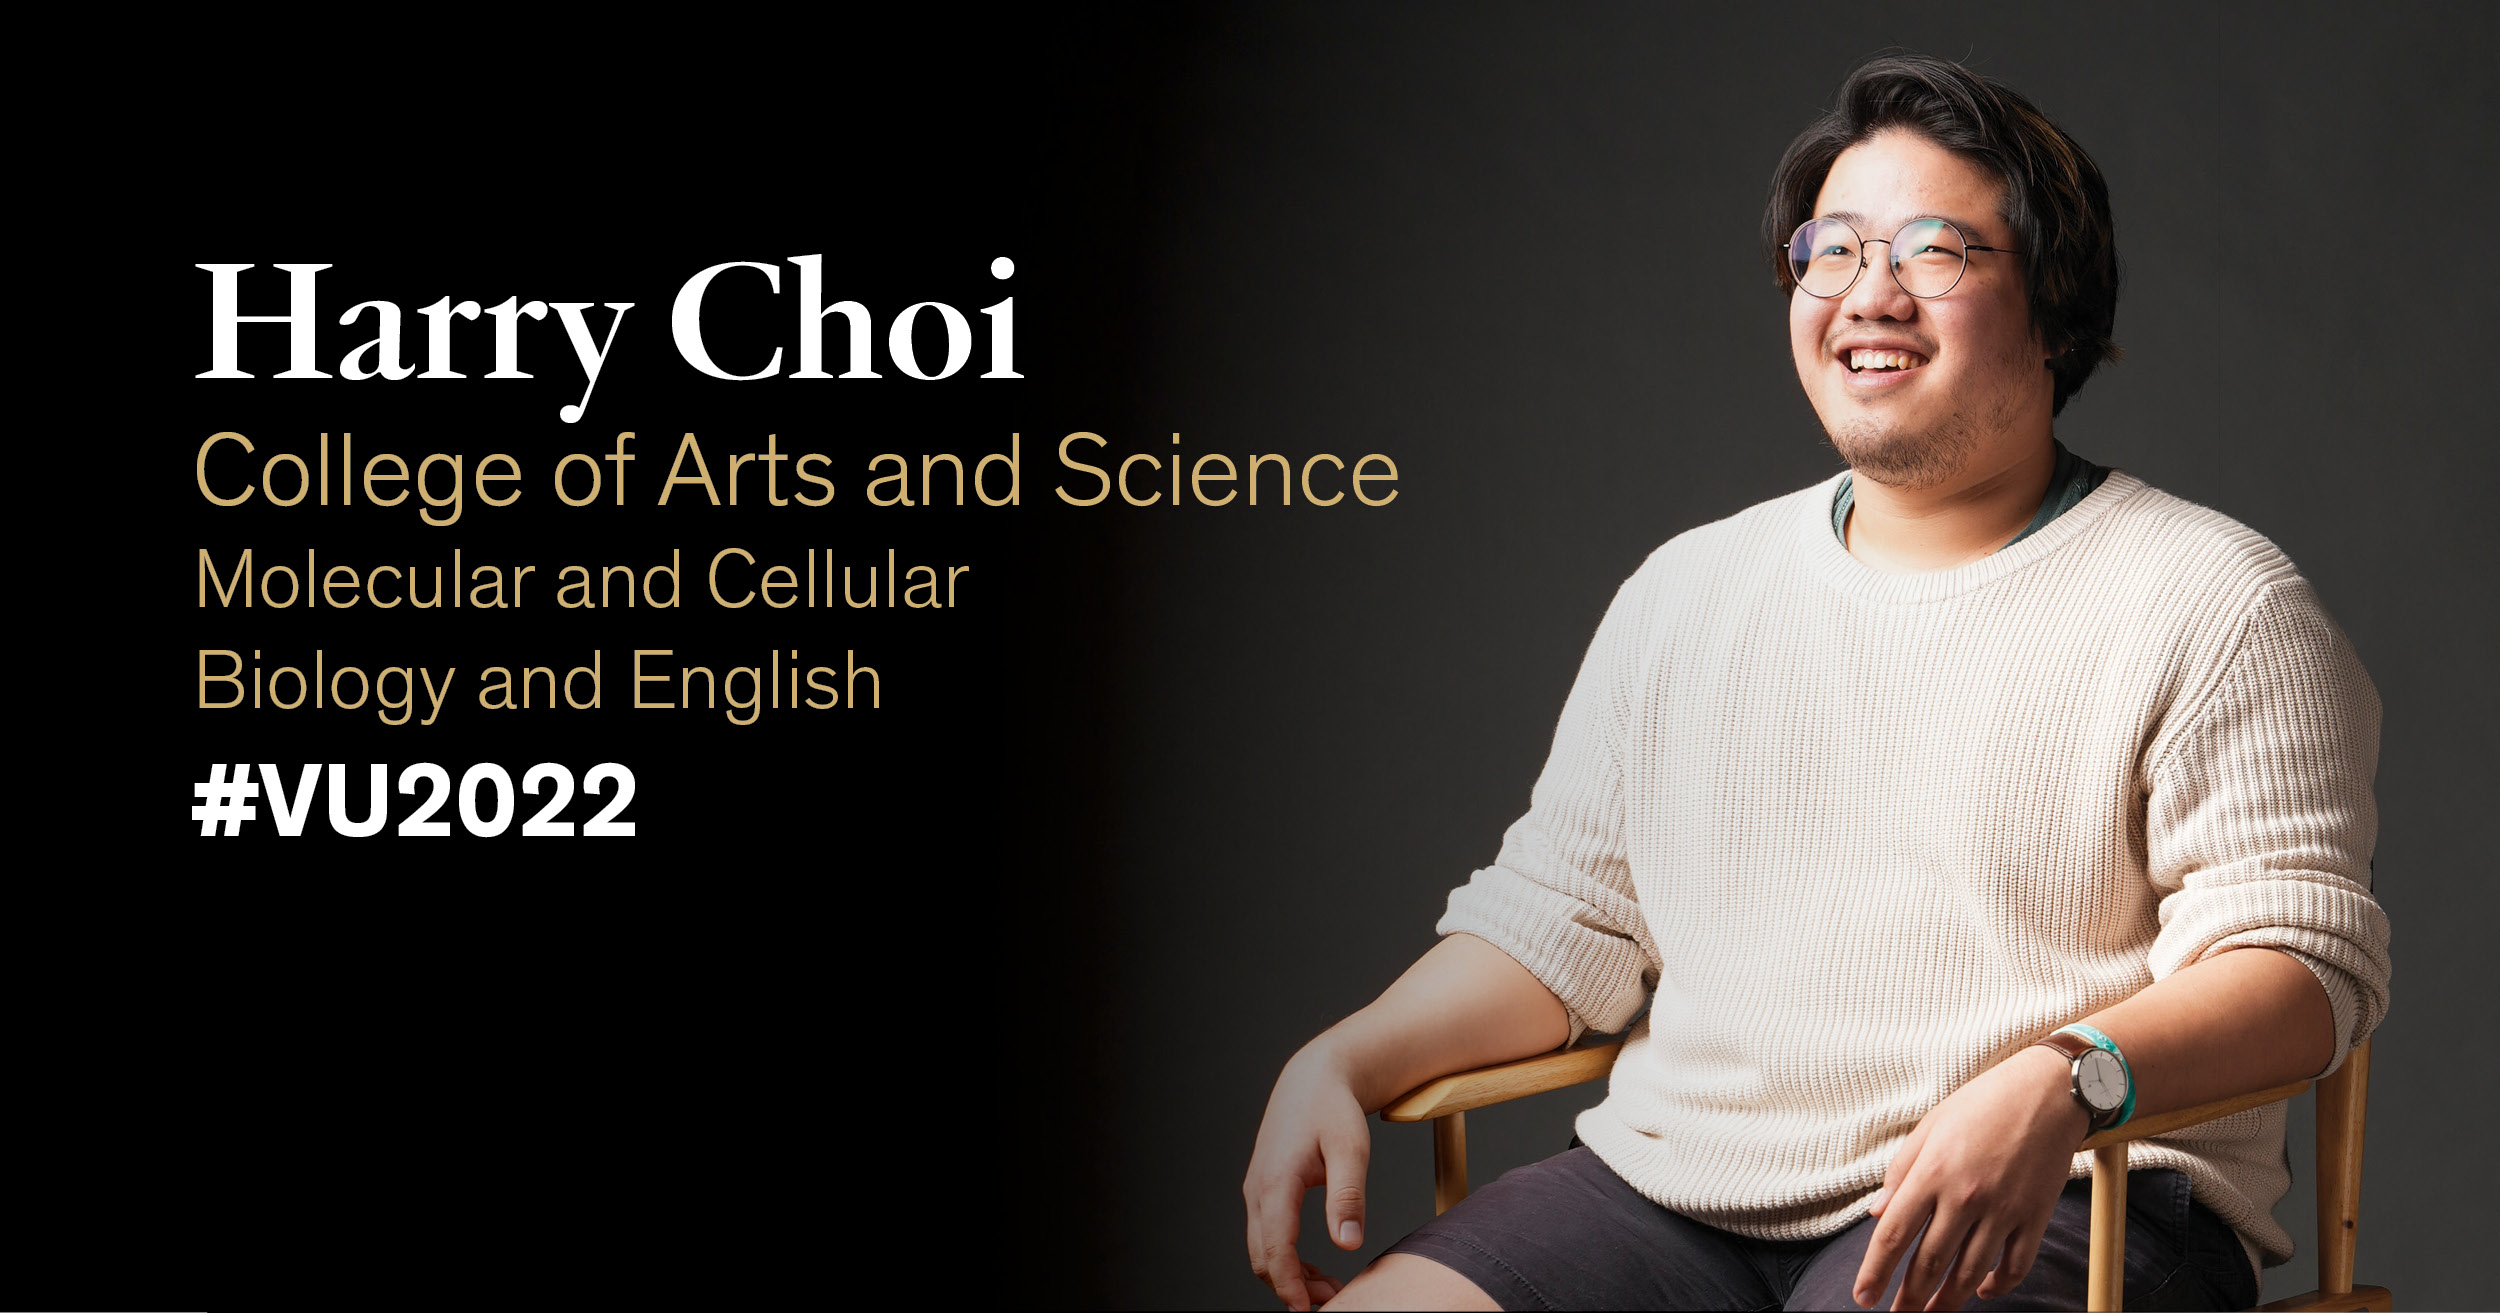 Class of 2022: Harry Choi uses global experiences to create belonging on campus